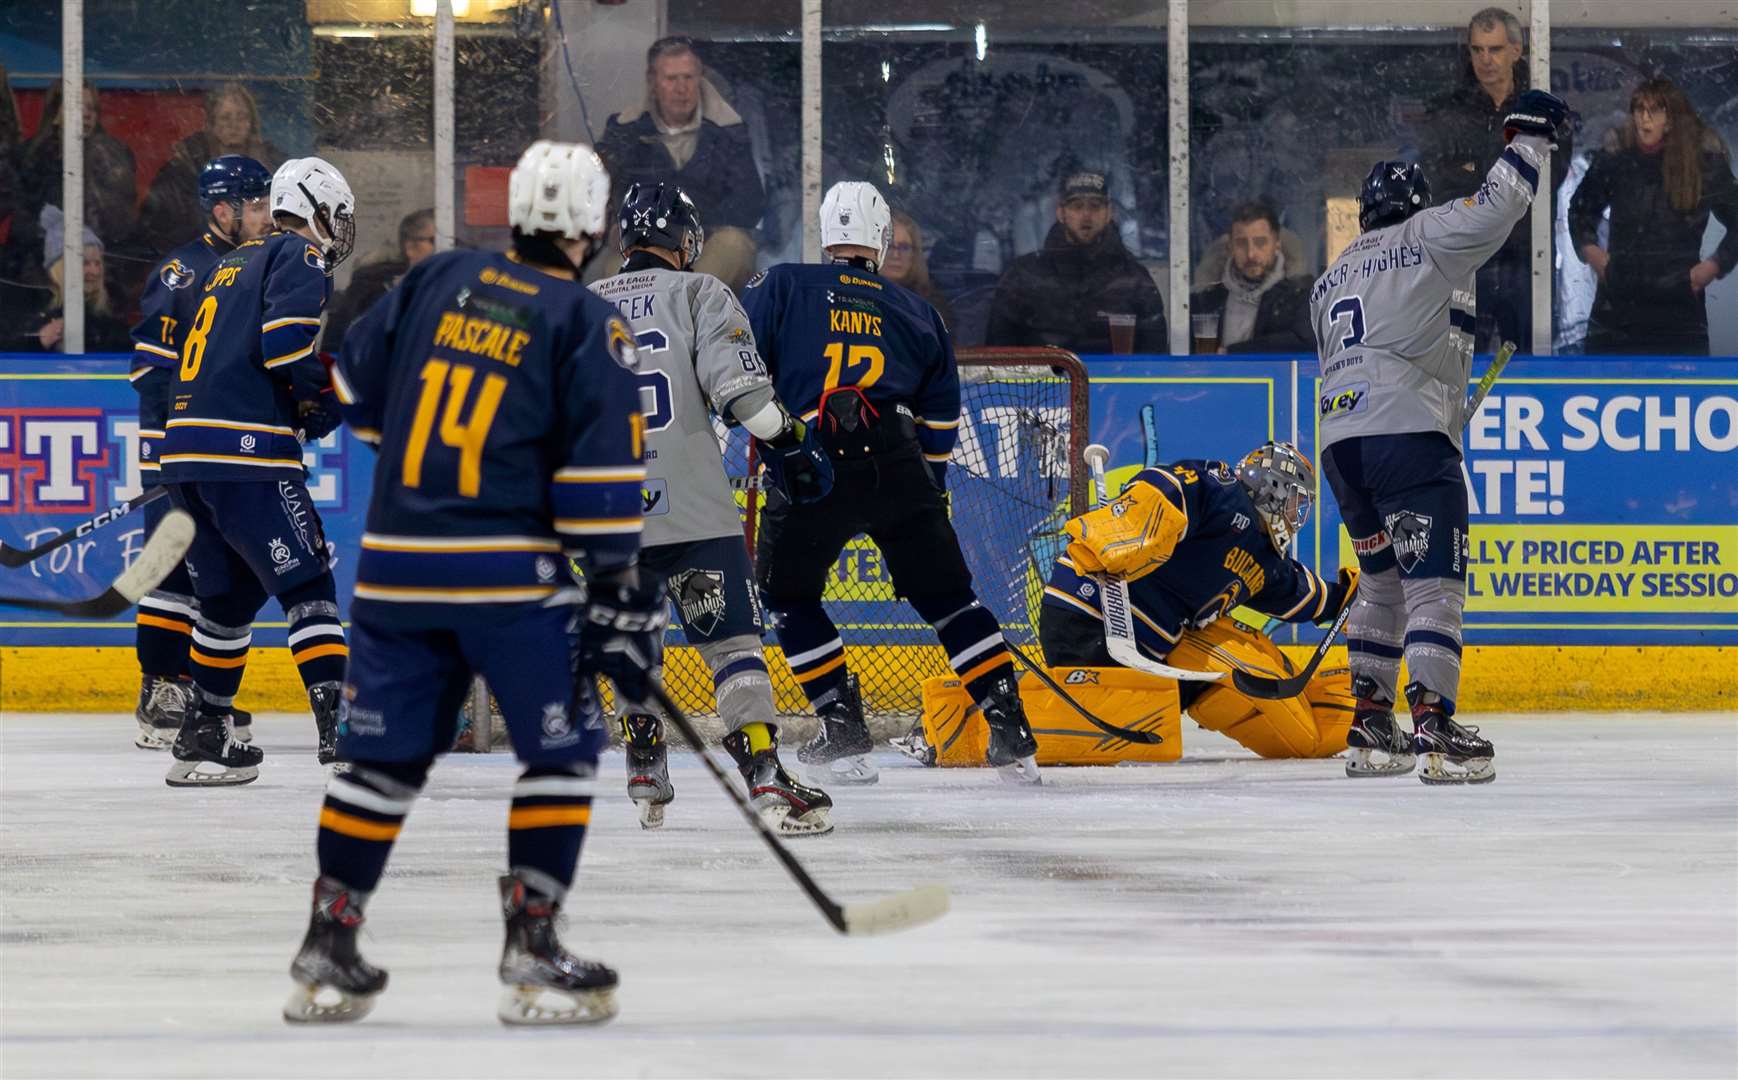 Goal action for the Invicta Dynamos against Romford Buccaneers Picture: David Trevallion